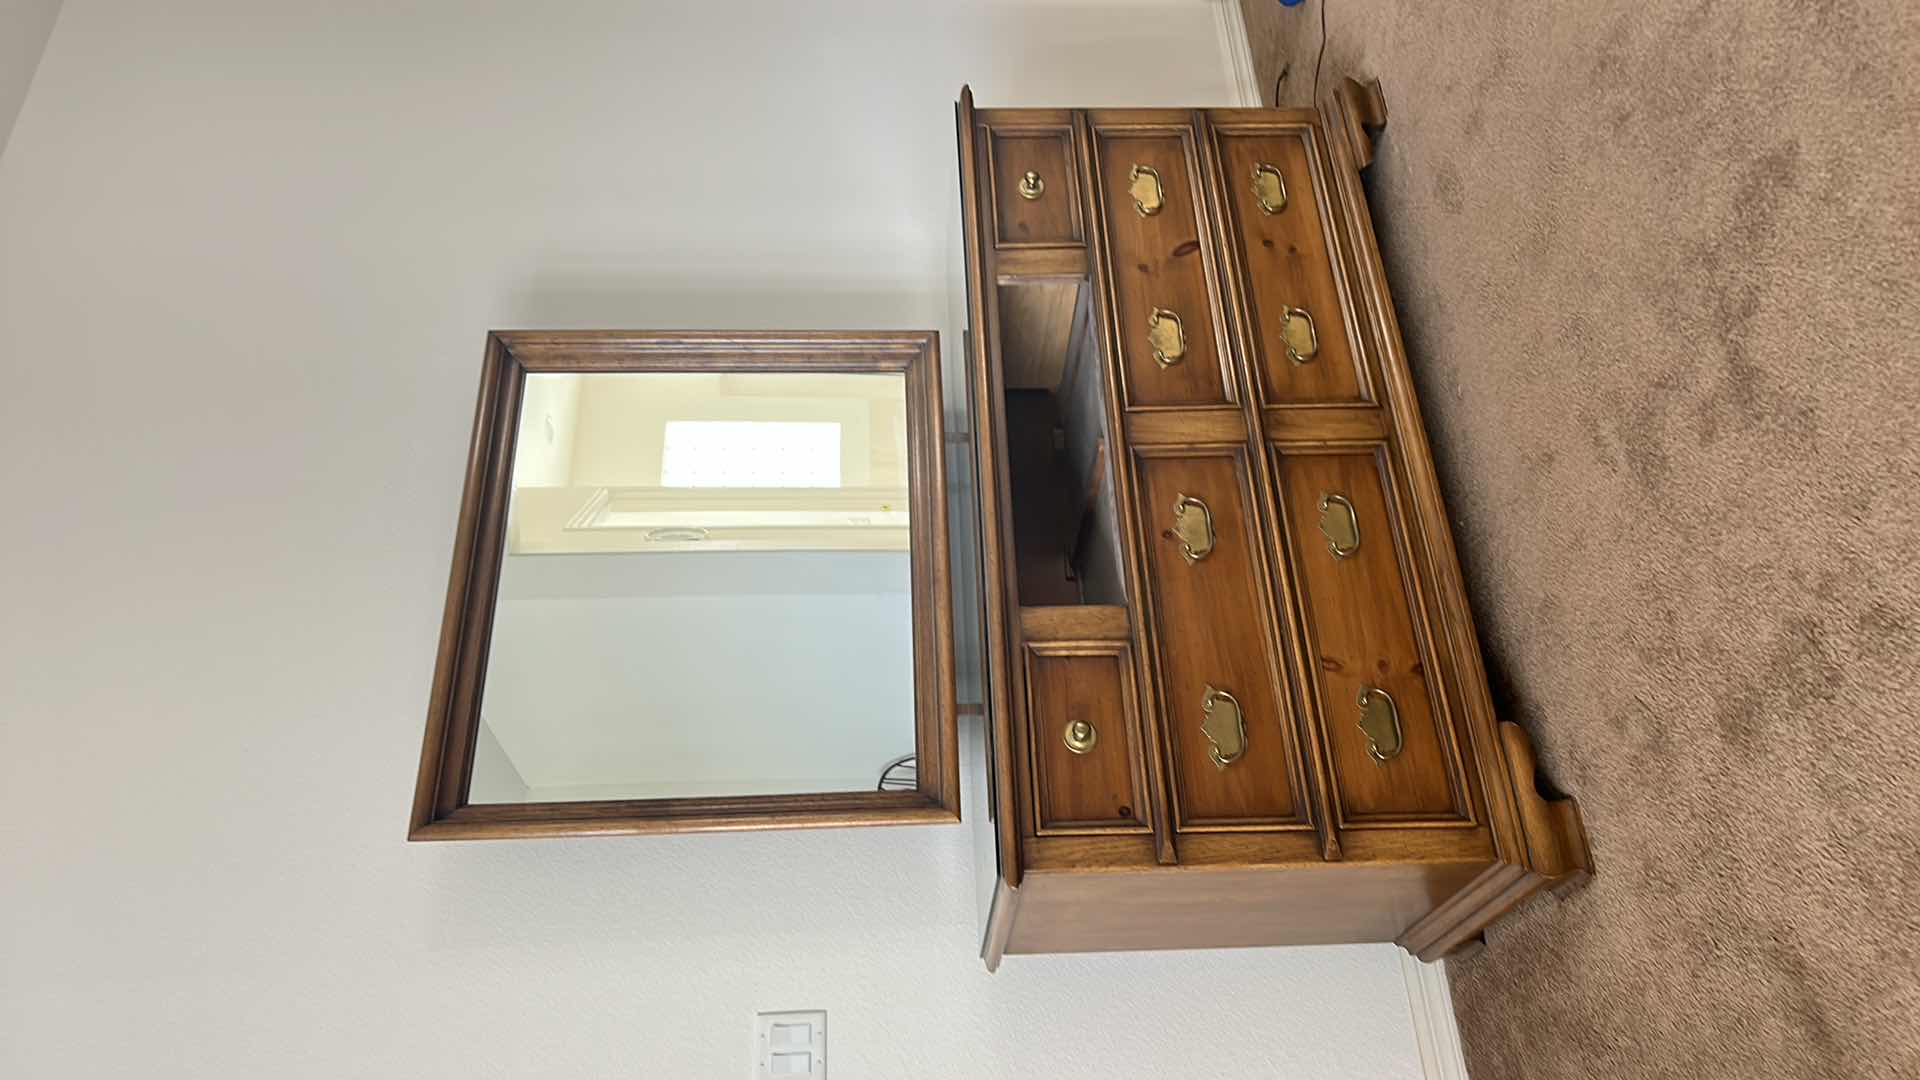 Photo 8 of DRESSER WITH MISSING DRAWER (COULD BE CUSTOMIZED) GLASS TOP AND ATTACHED MIRROR  62.5 x 21” x H 33”